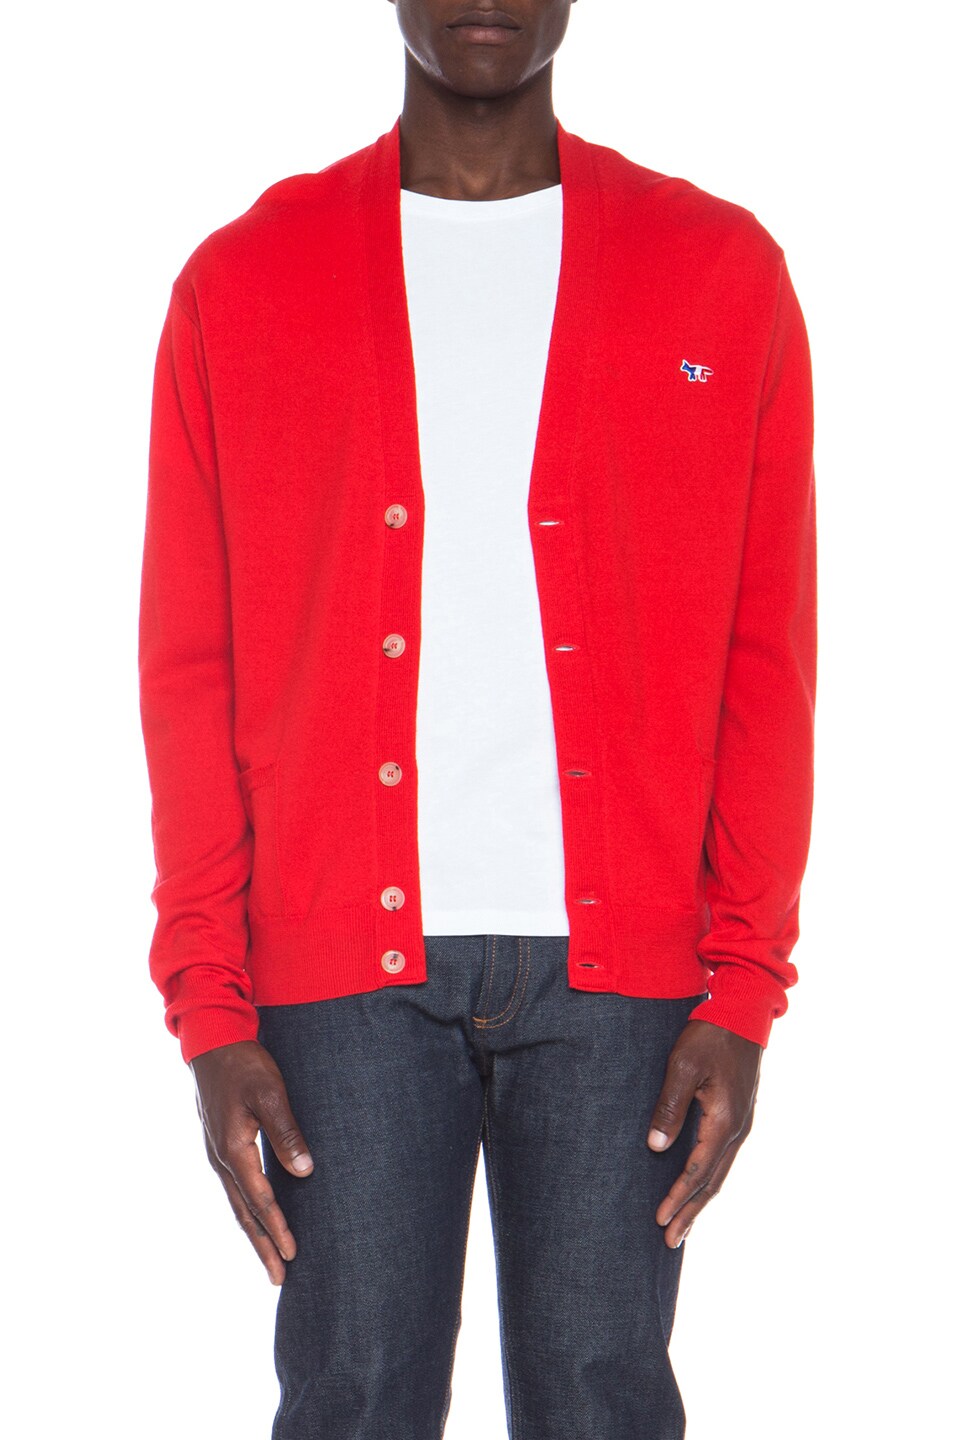 Image 1 of Maison Kitsune Classic Virgin Wool Cardigan Tricolore Patch in Red